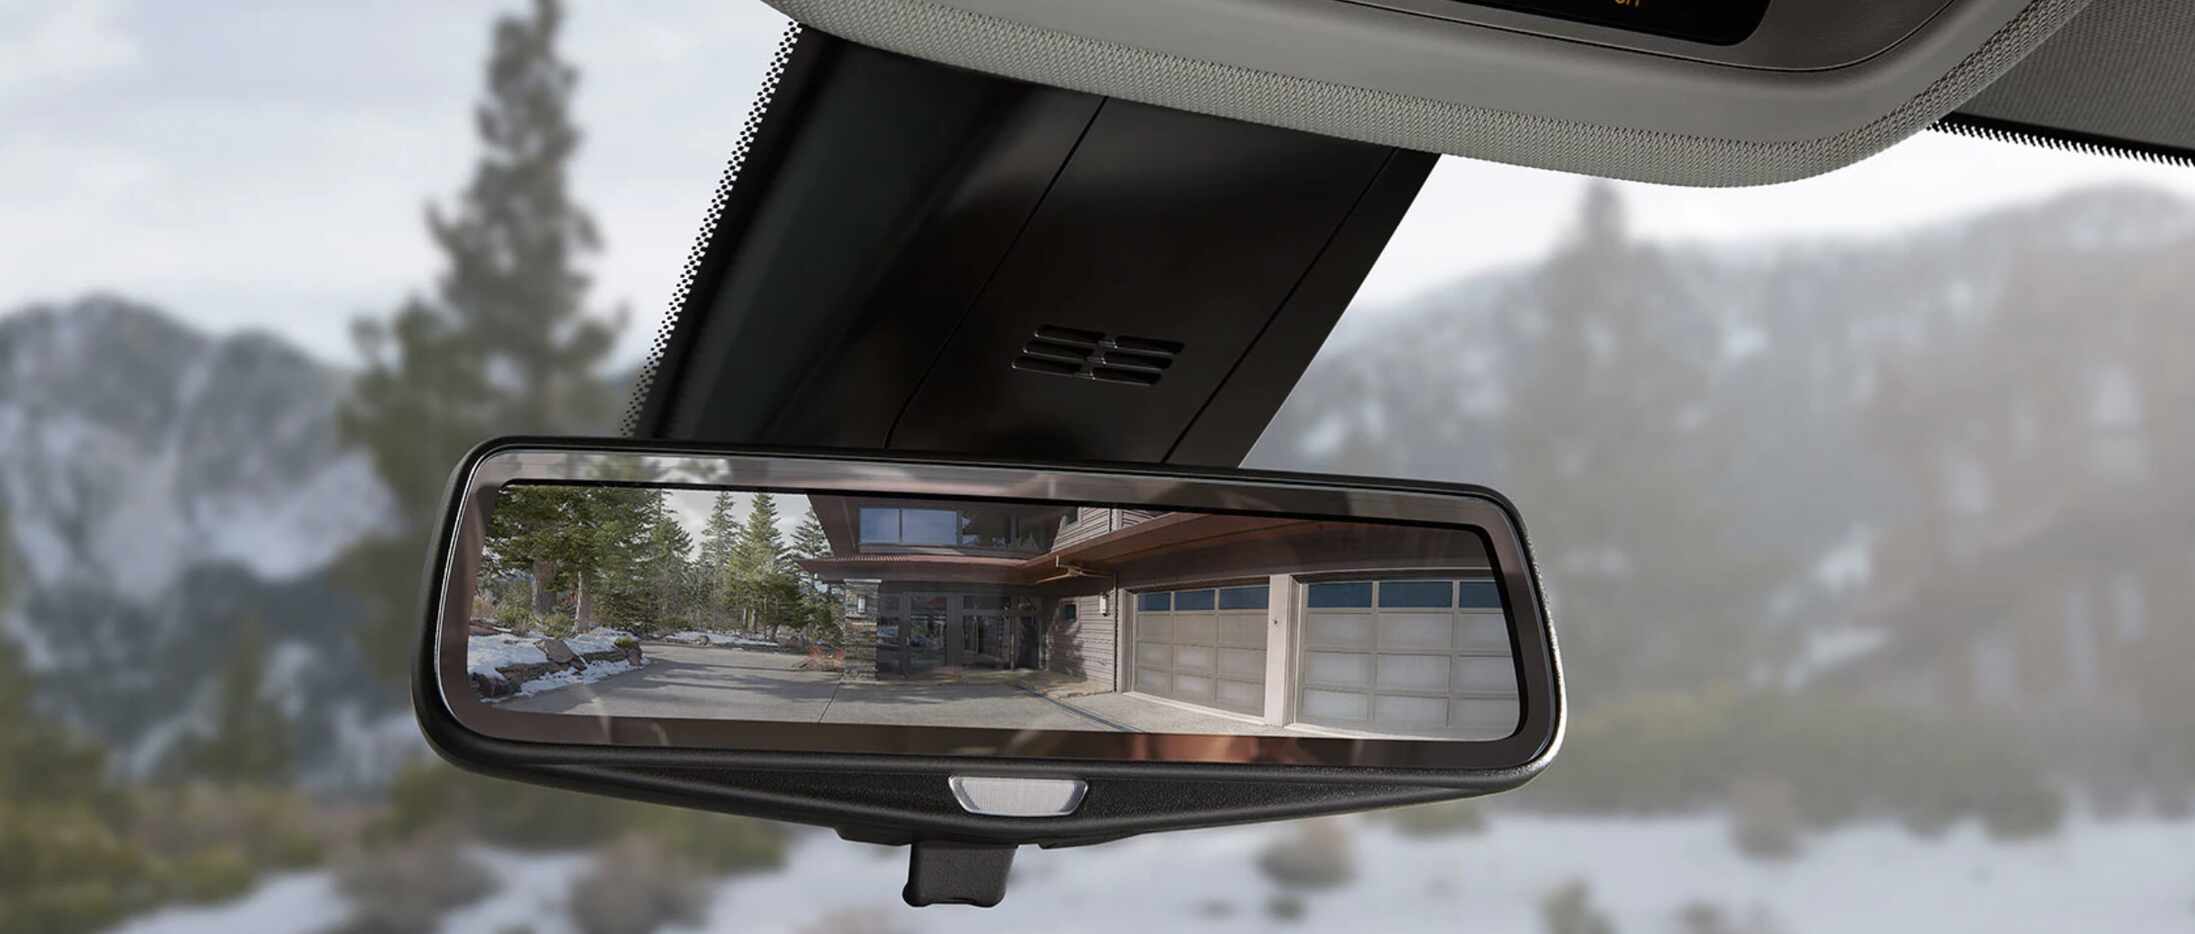 The Traverse's rearview mirror has its own screen to show the rearview camera.